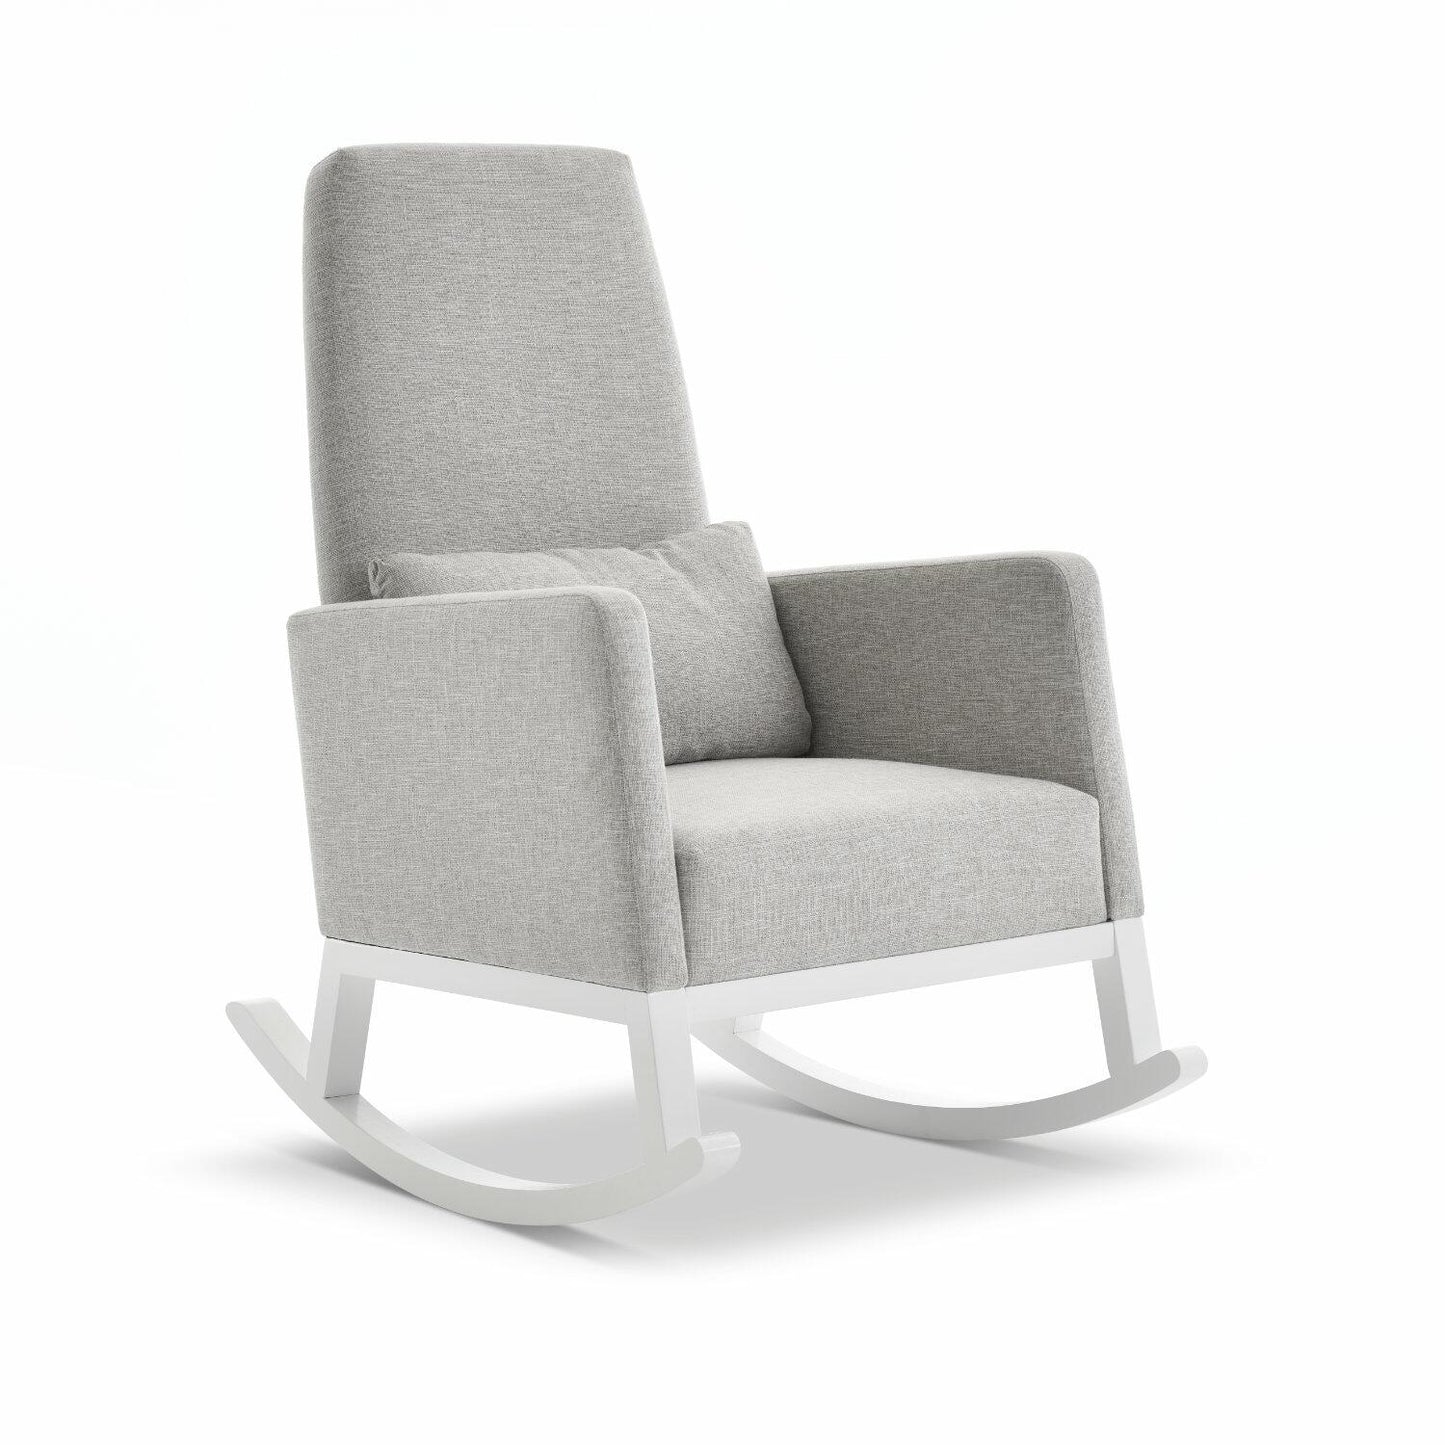 OBaby High Back Rocking Chair in Stone- Nursing Chair-1